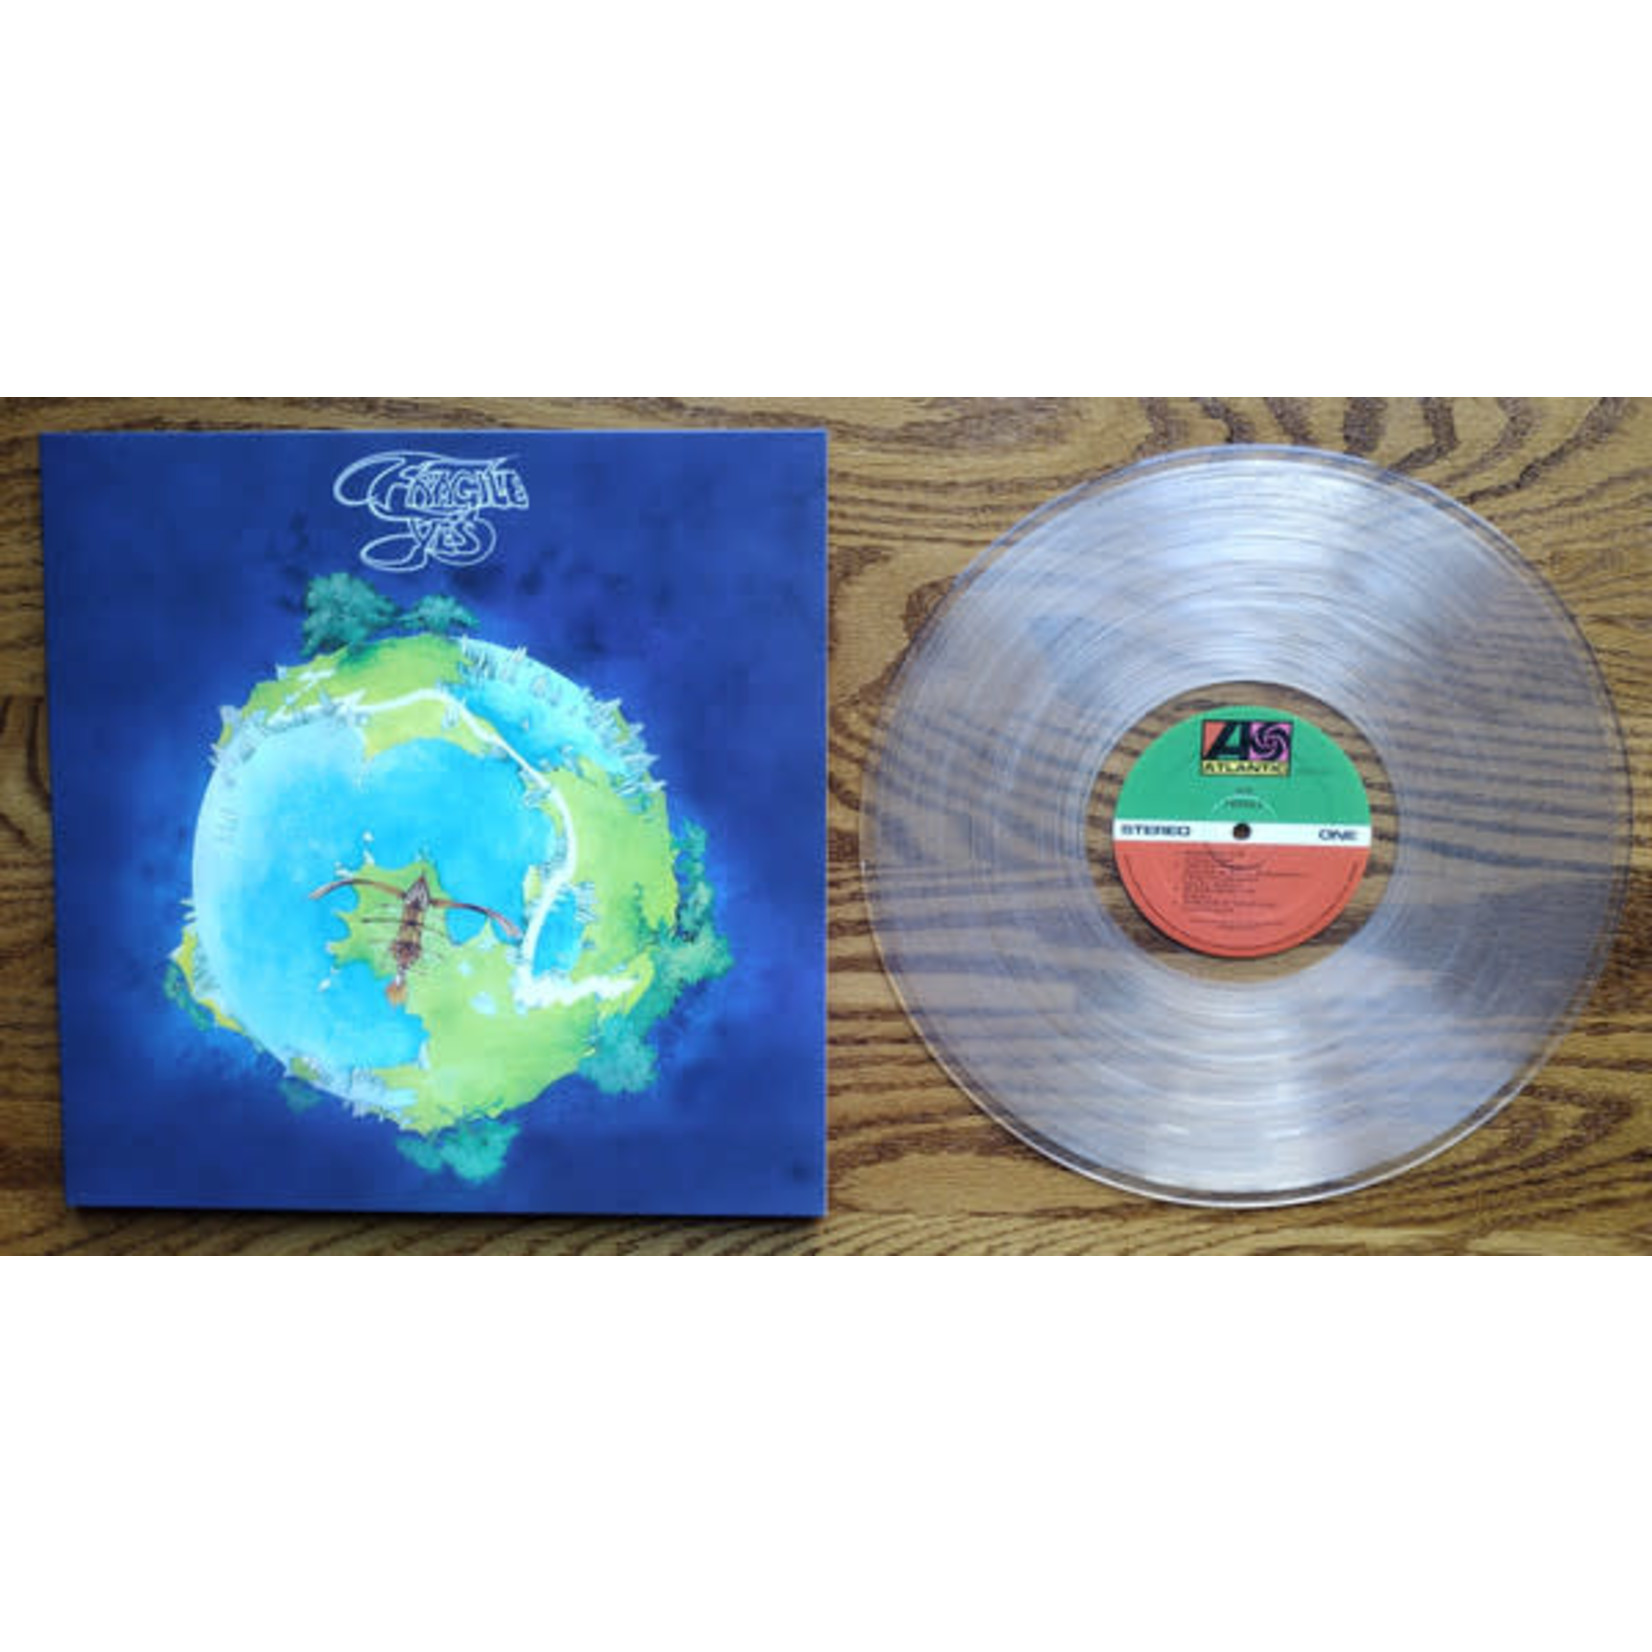 [New] Yes: Fragile (clear vinyl, indie exclusive) [RHINO]